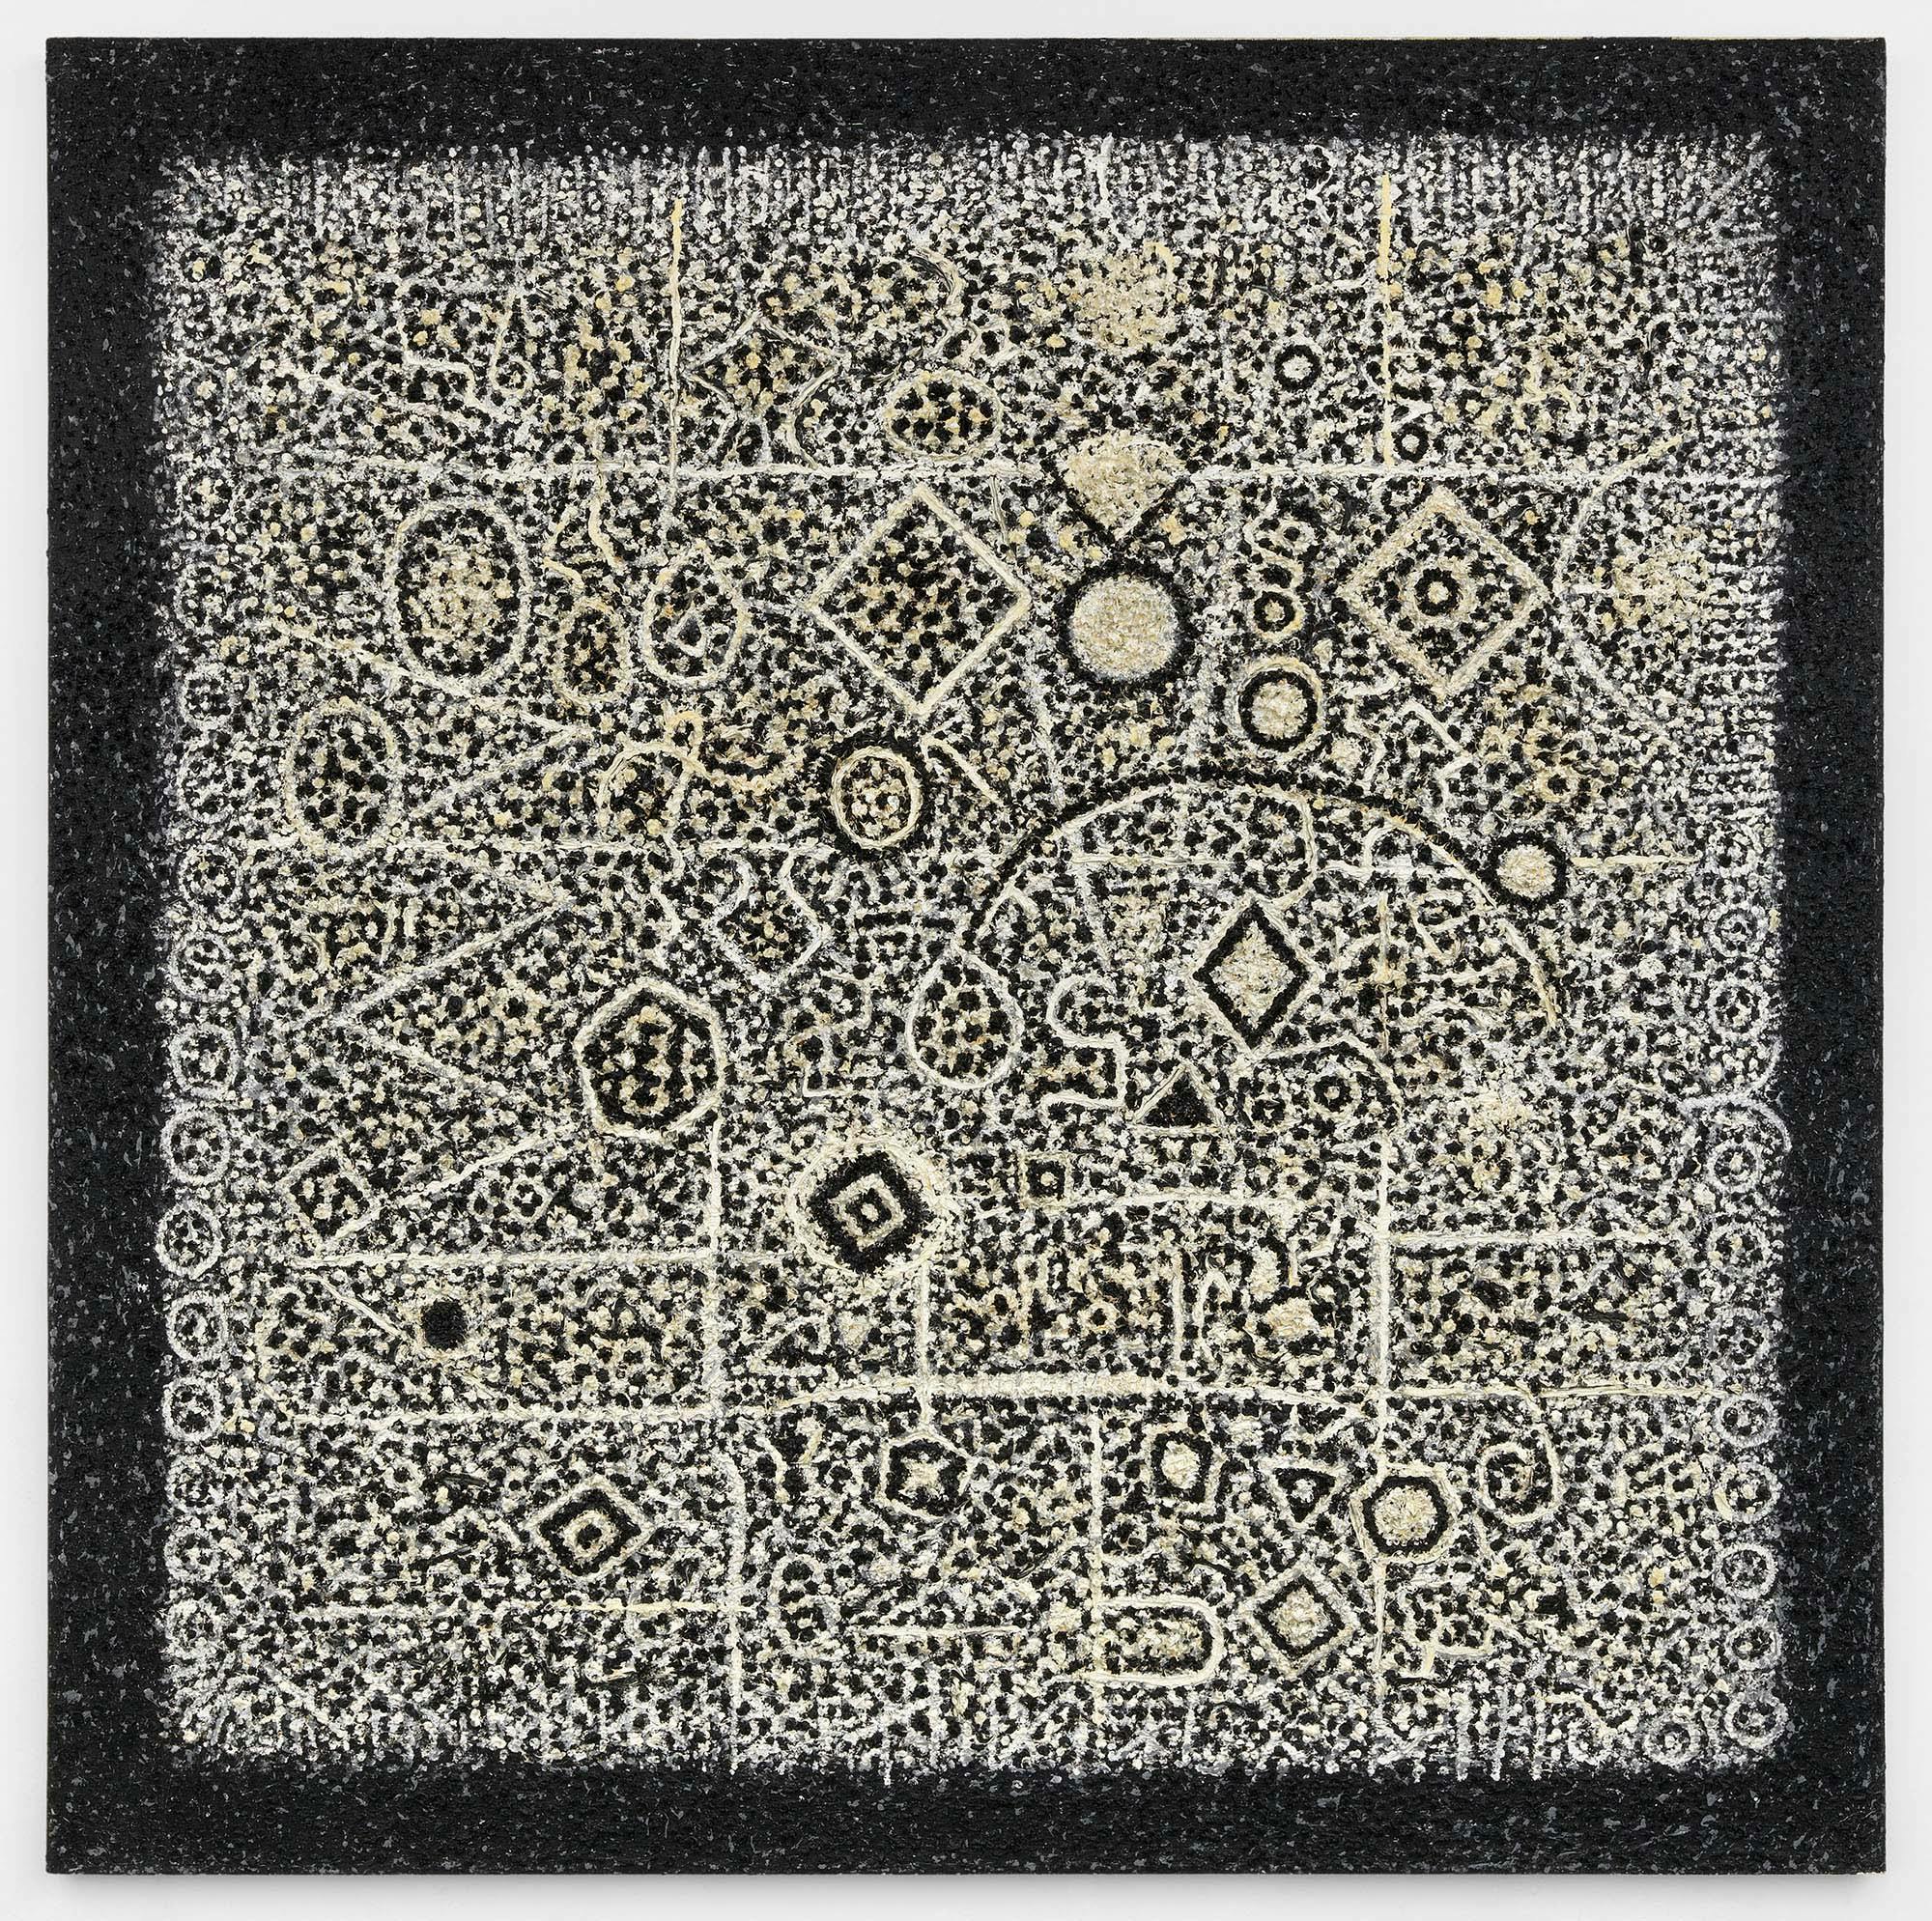 Venice, Nightspace
1981–82
Acrylic on linen
90 x 90 in. (228.6 x 228.6 cm)
 – The Richard Pousette-Dart Foundation